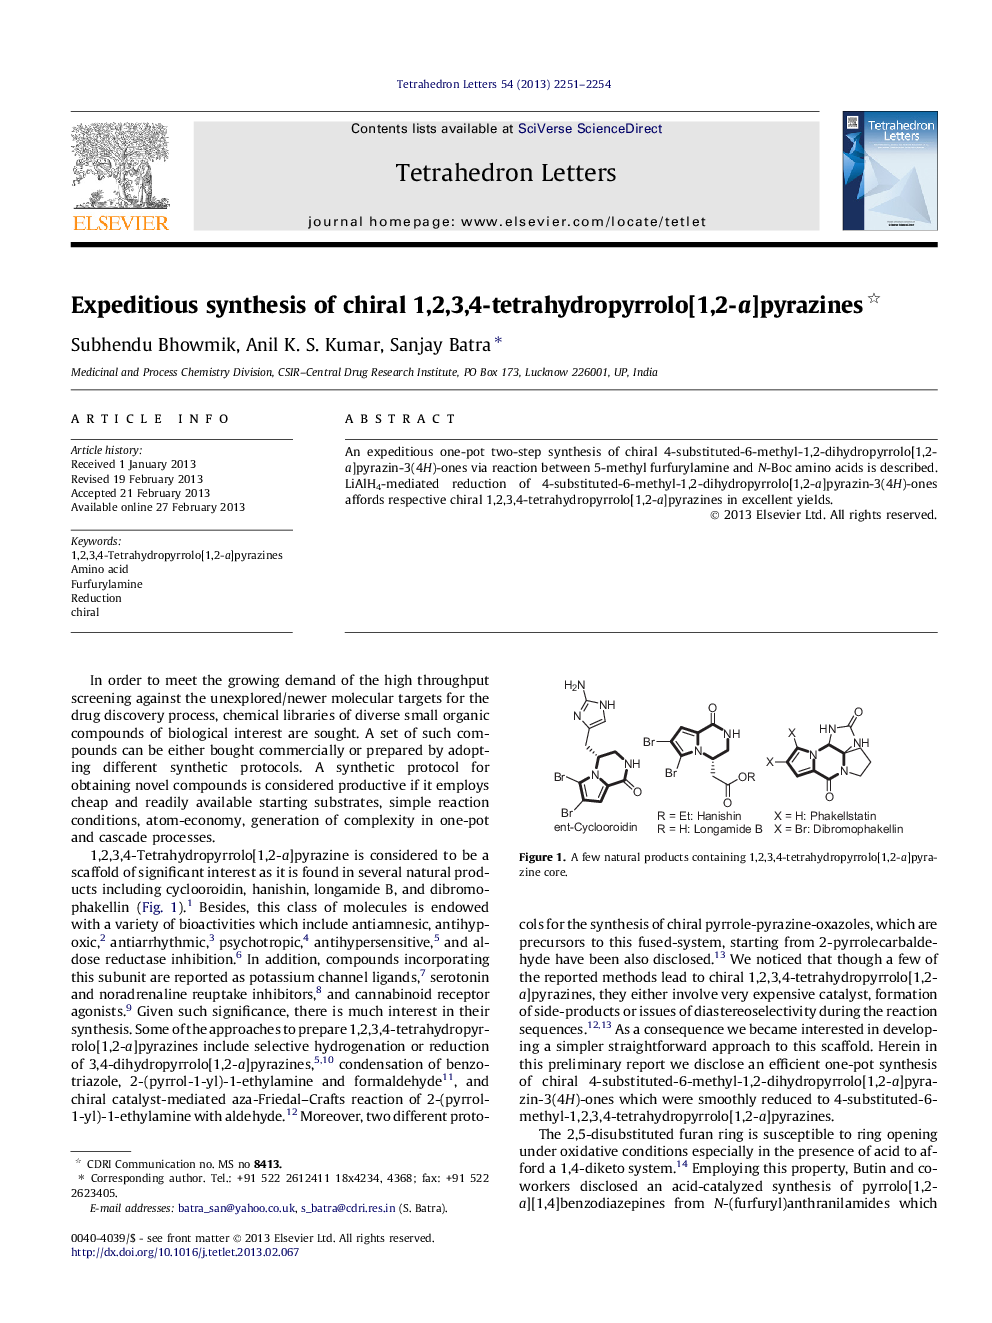 Expeditious synthesis of chiral 1,2,3,4-tetrahydropyrrolo[1,2-a]pyrazines